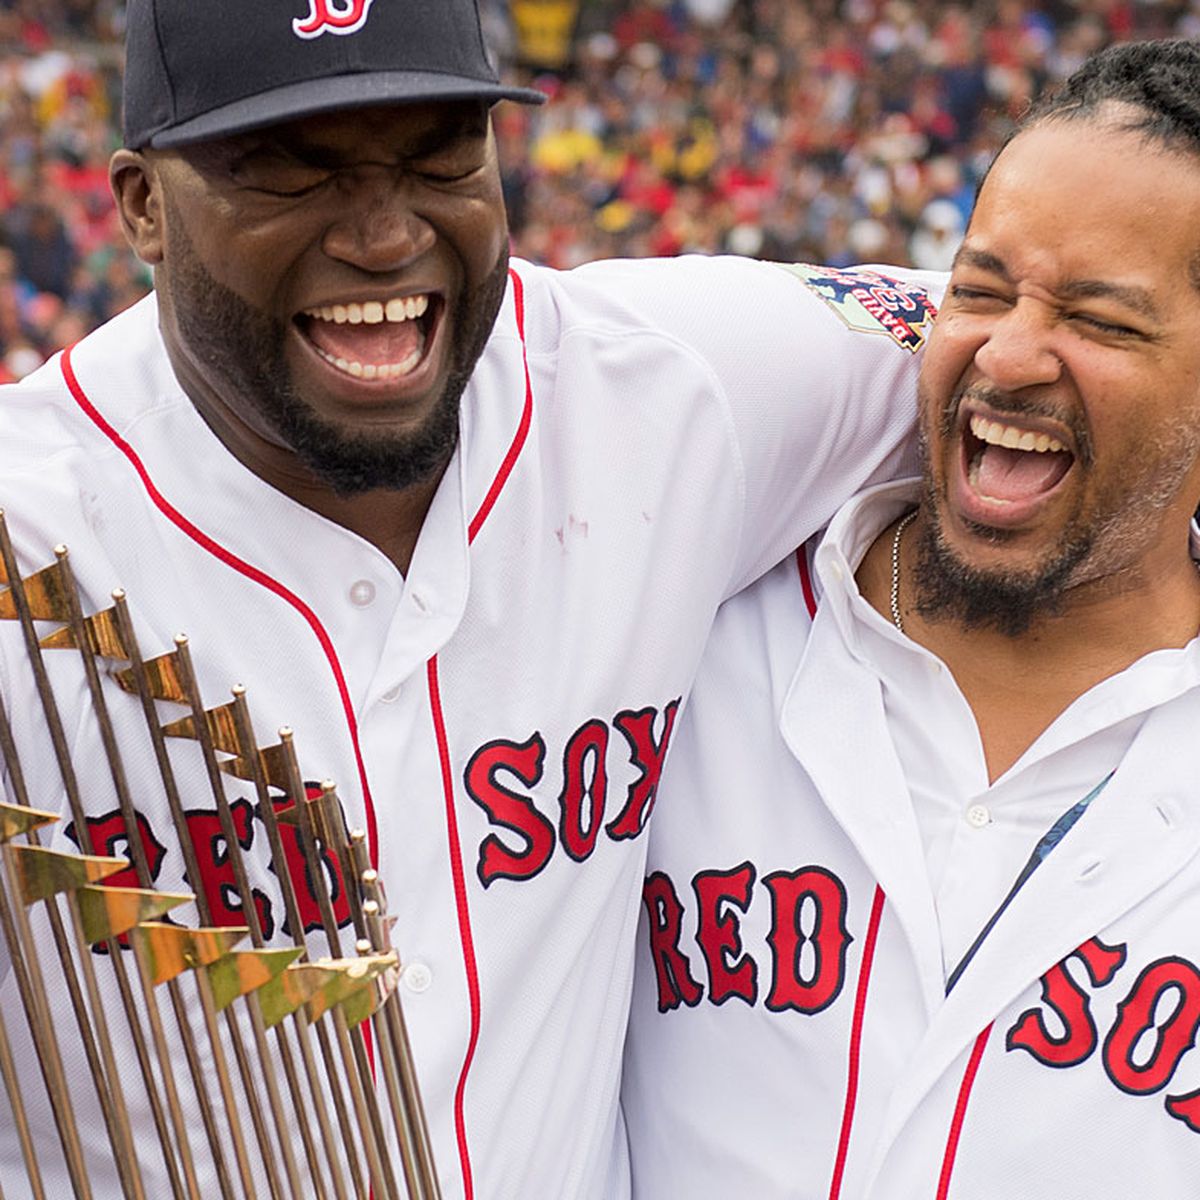 Manny Ramirez signs to play baseball in Australia - Covering the Corner